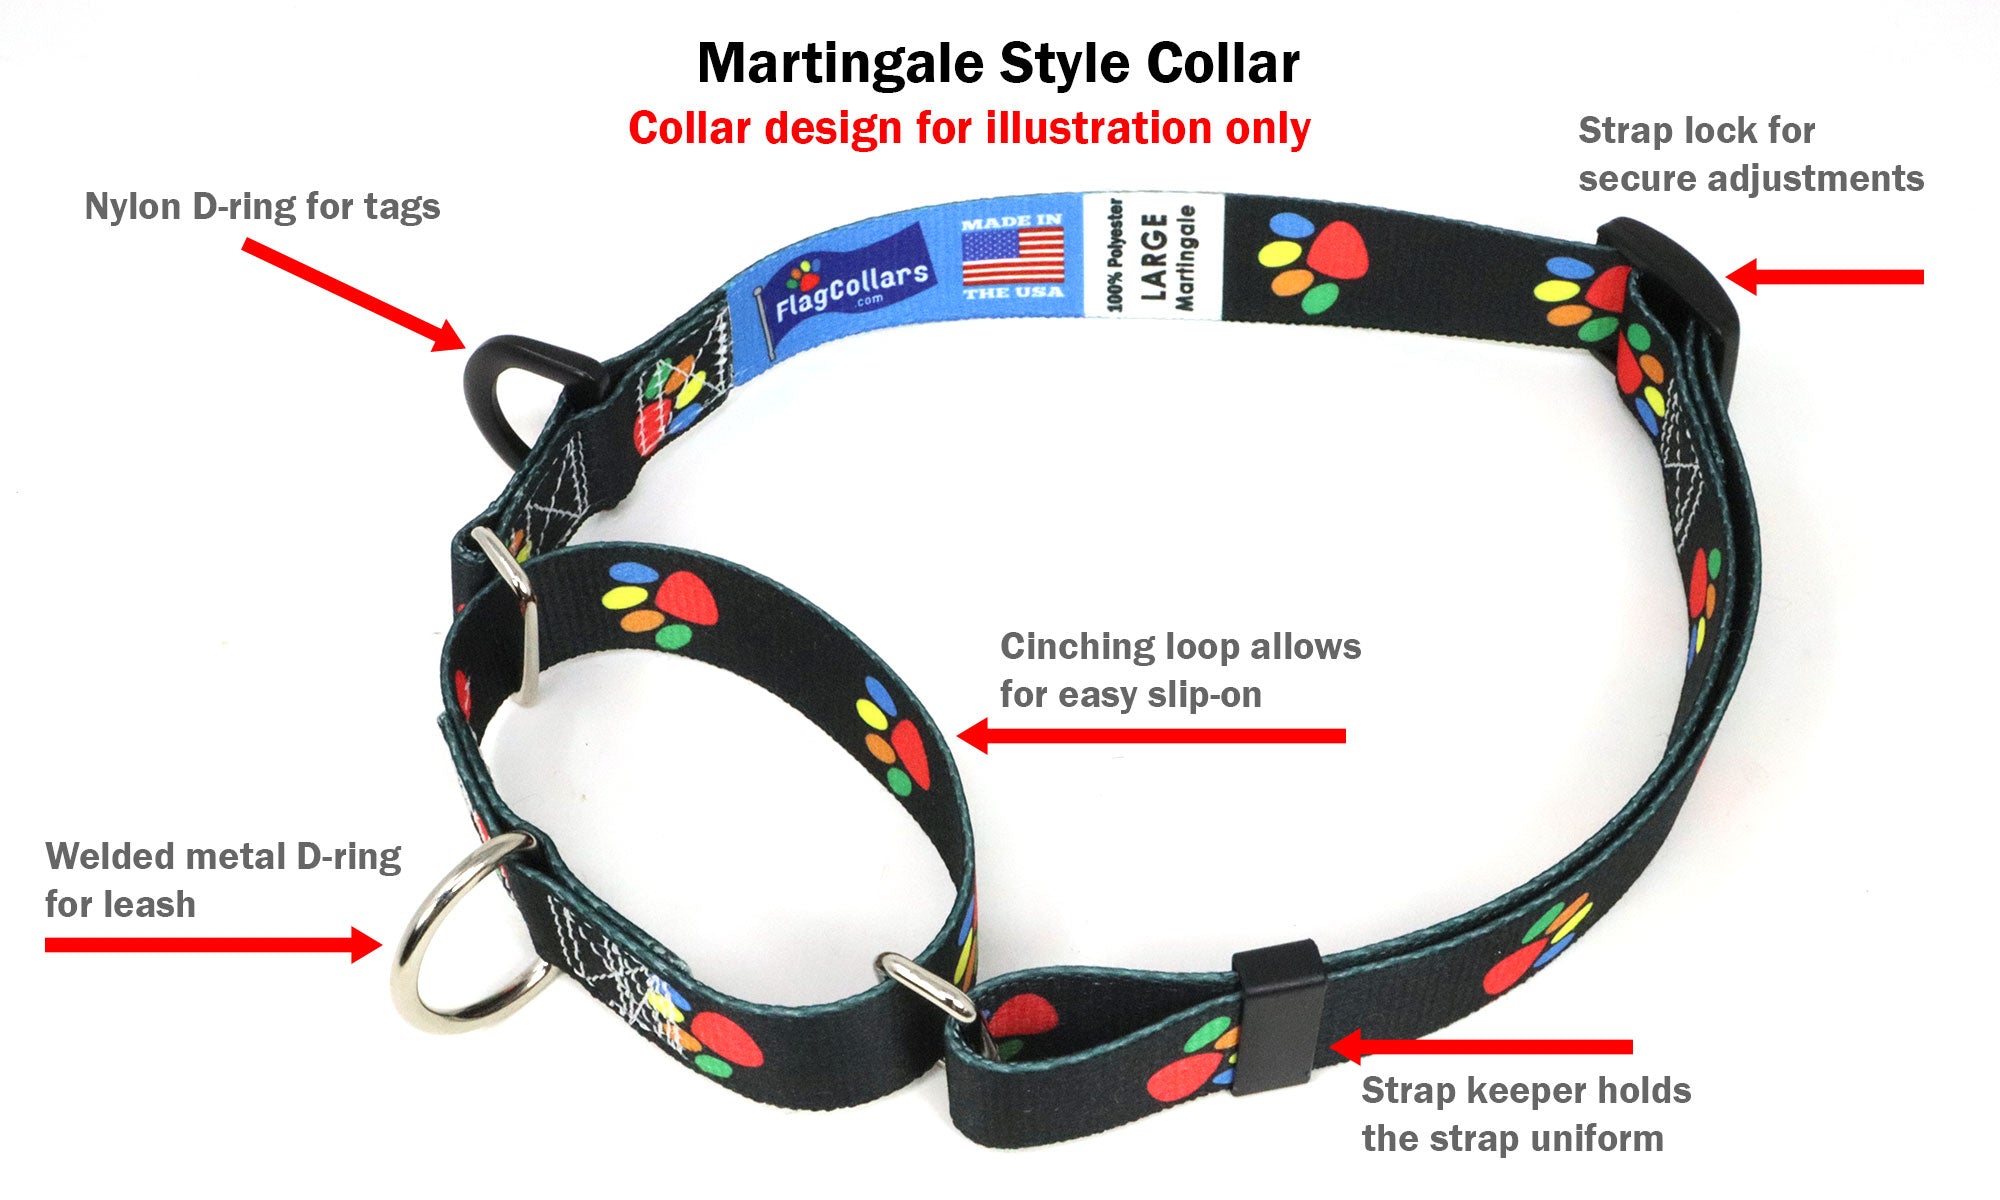 Bavaria Dog Collar | Quick Release or Martingale Style | Made in NJ, USA